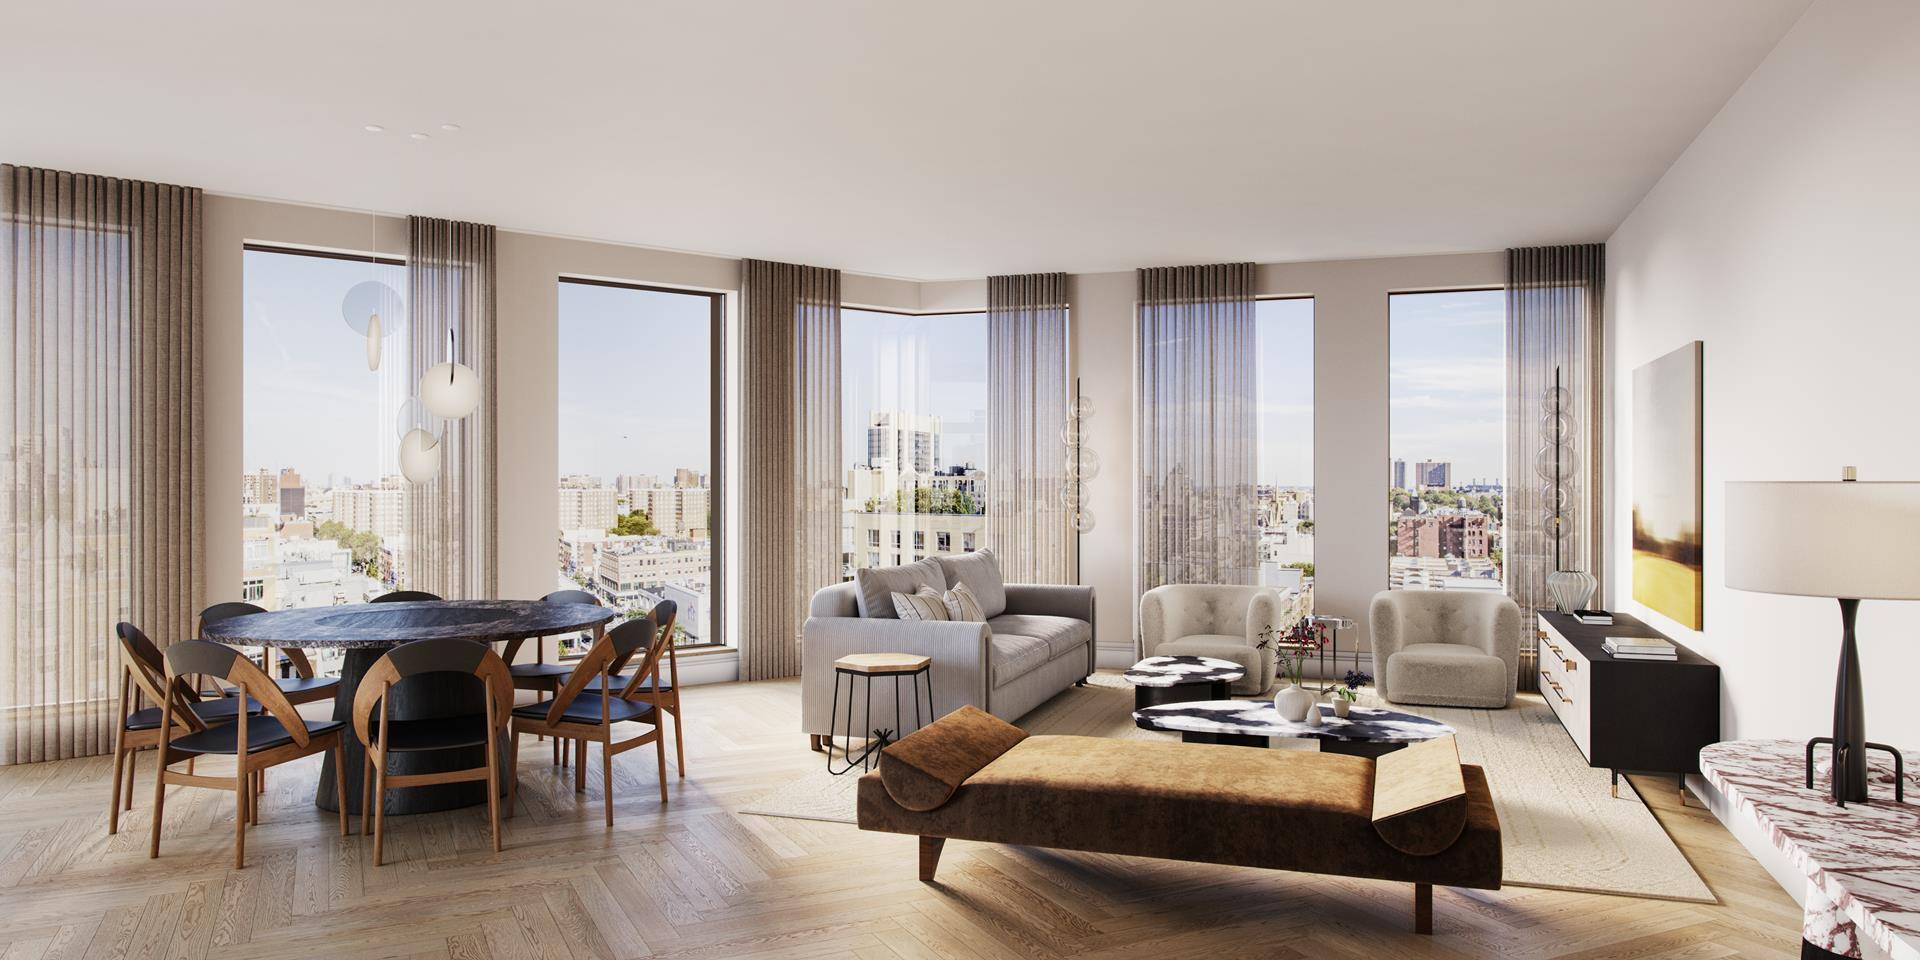 Sales Gallery Now Open By Appointment Introducing residence 12I at 300 West, a 1, 085 square foot northwestern facing two bedroom, two bathroom, offering an enormous living and dining area ...